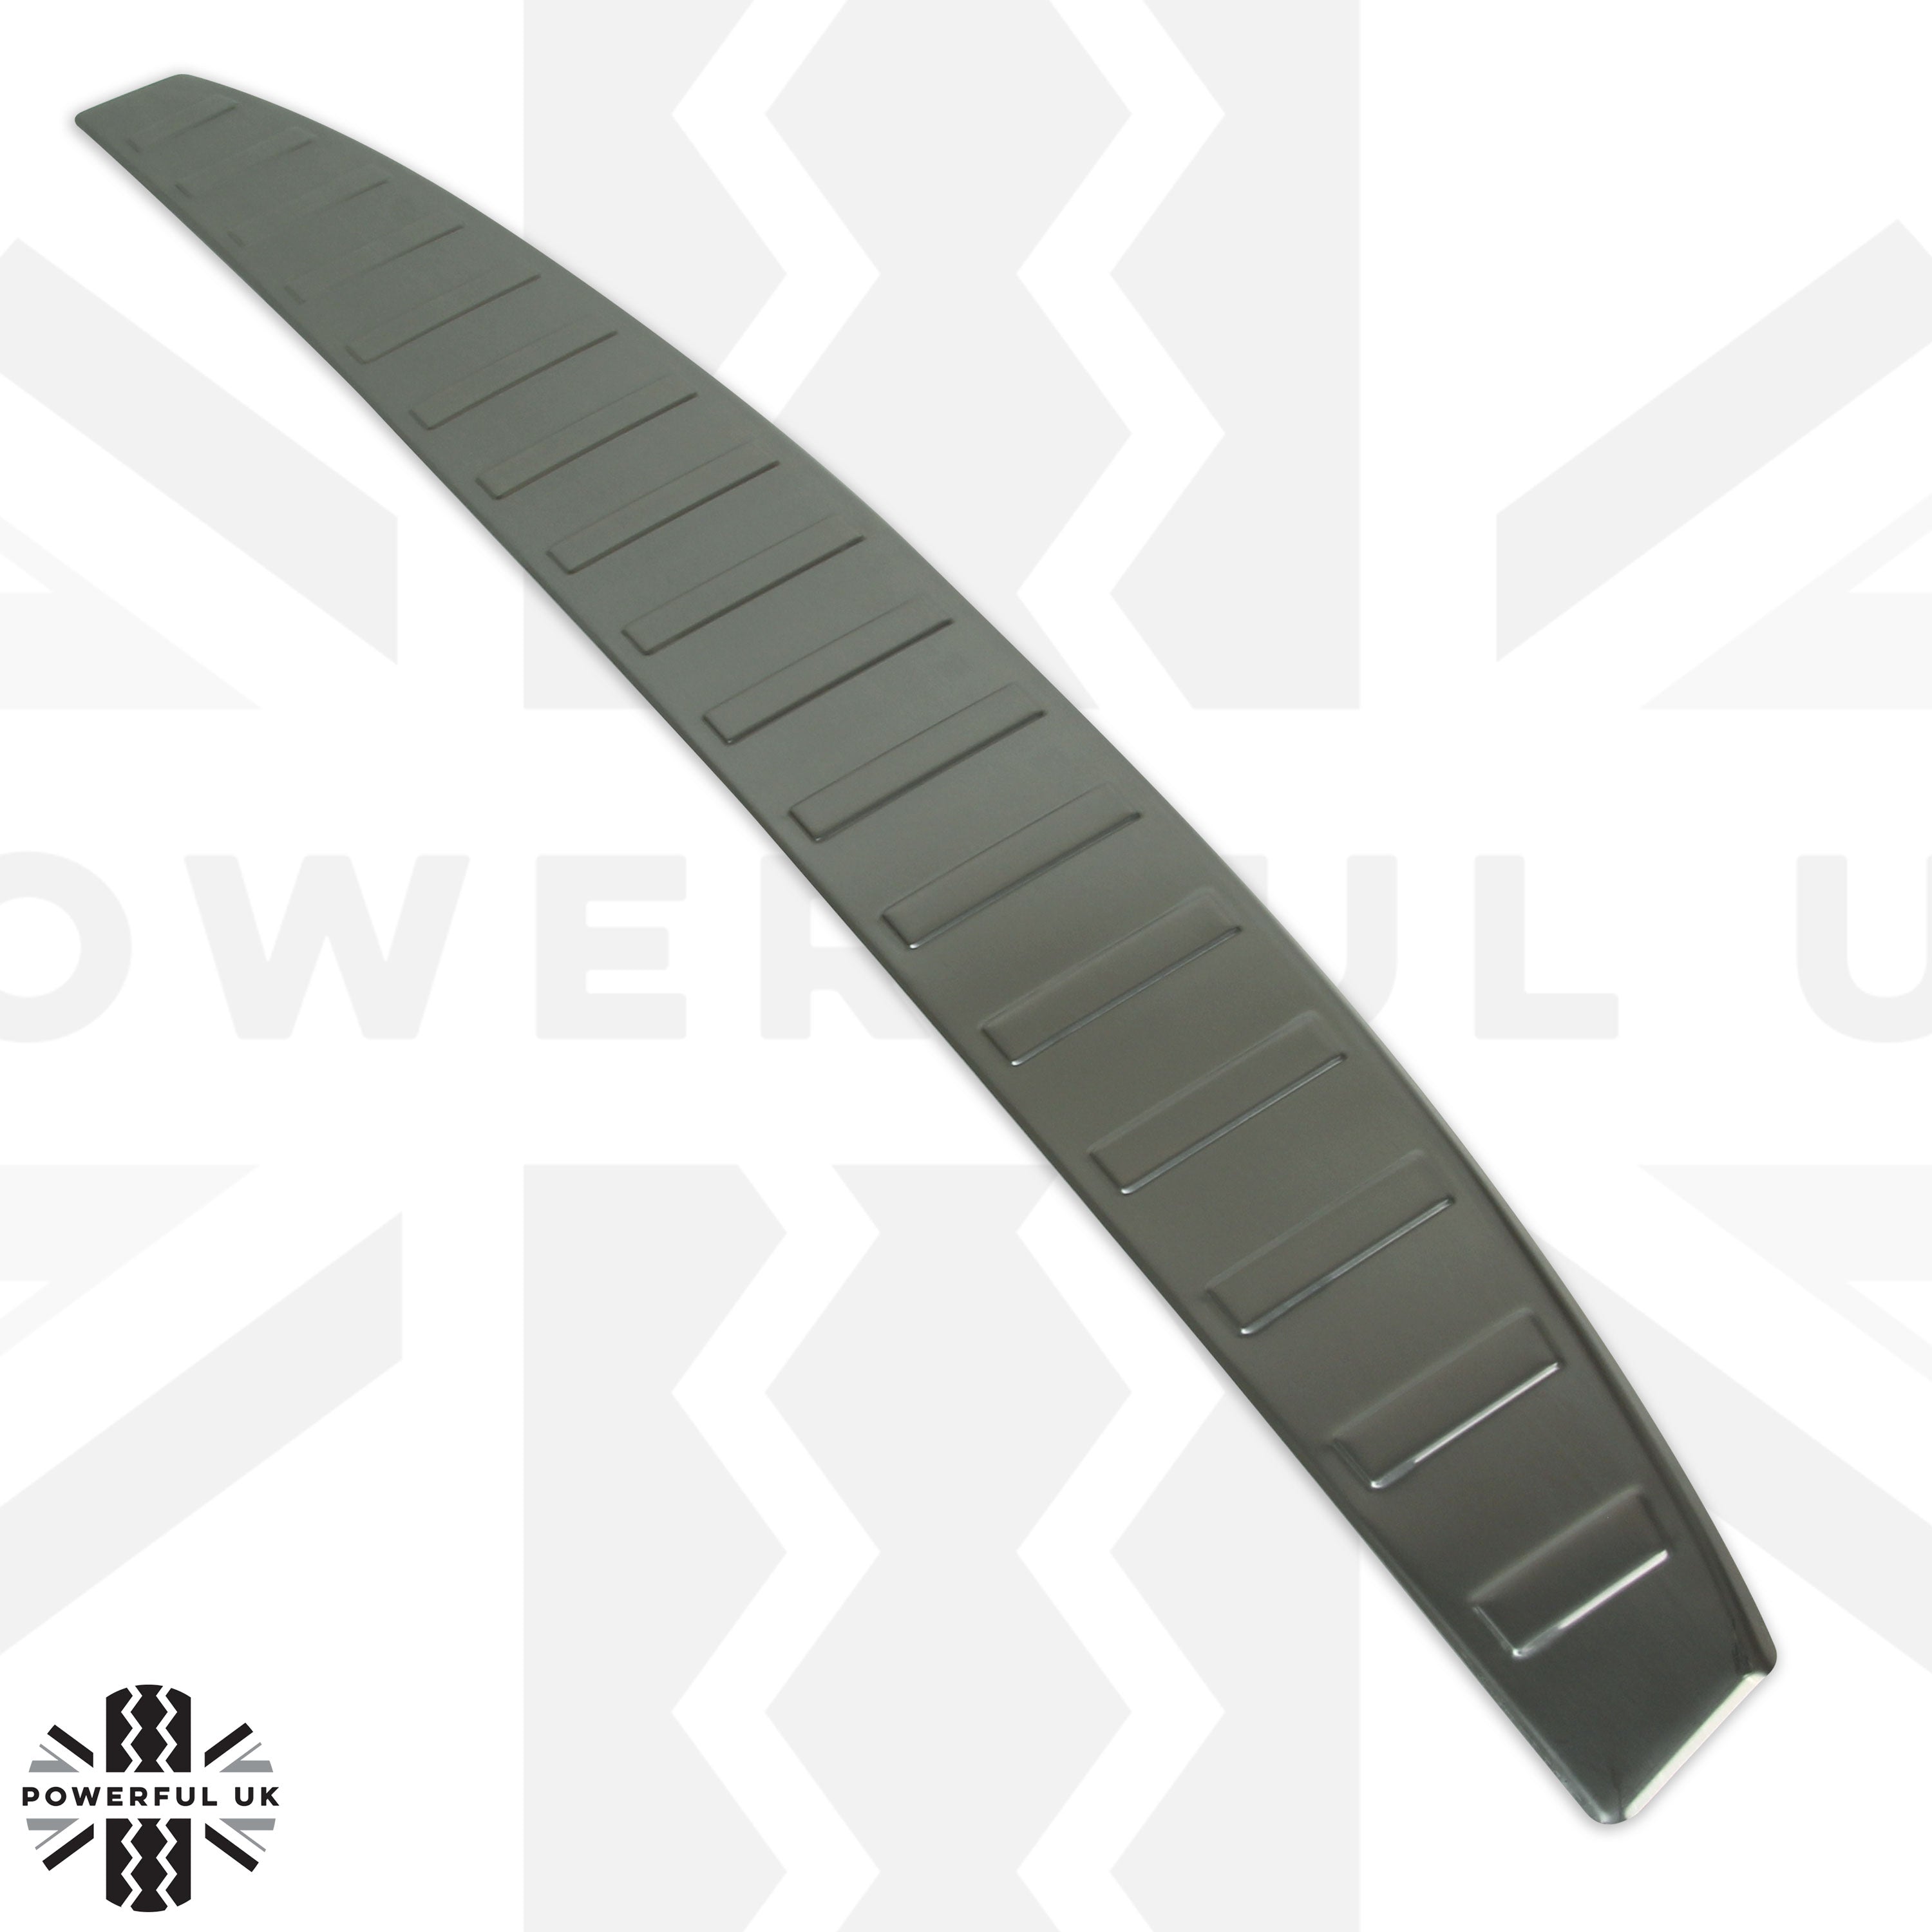 Stainless steel rear bumper step cover for Land Rover Discovery 5